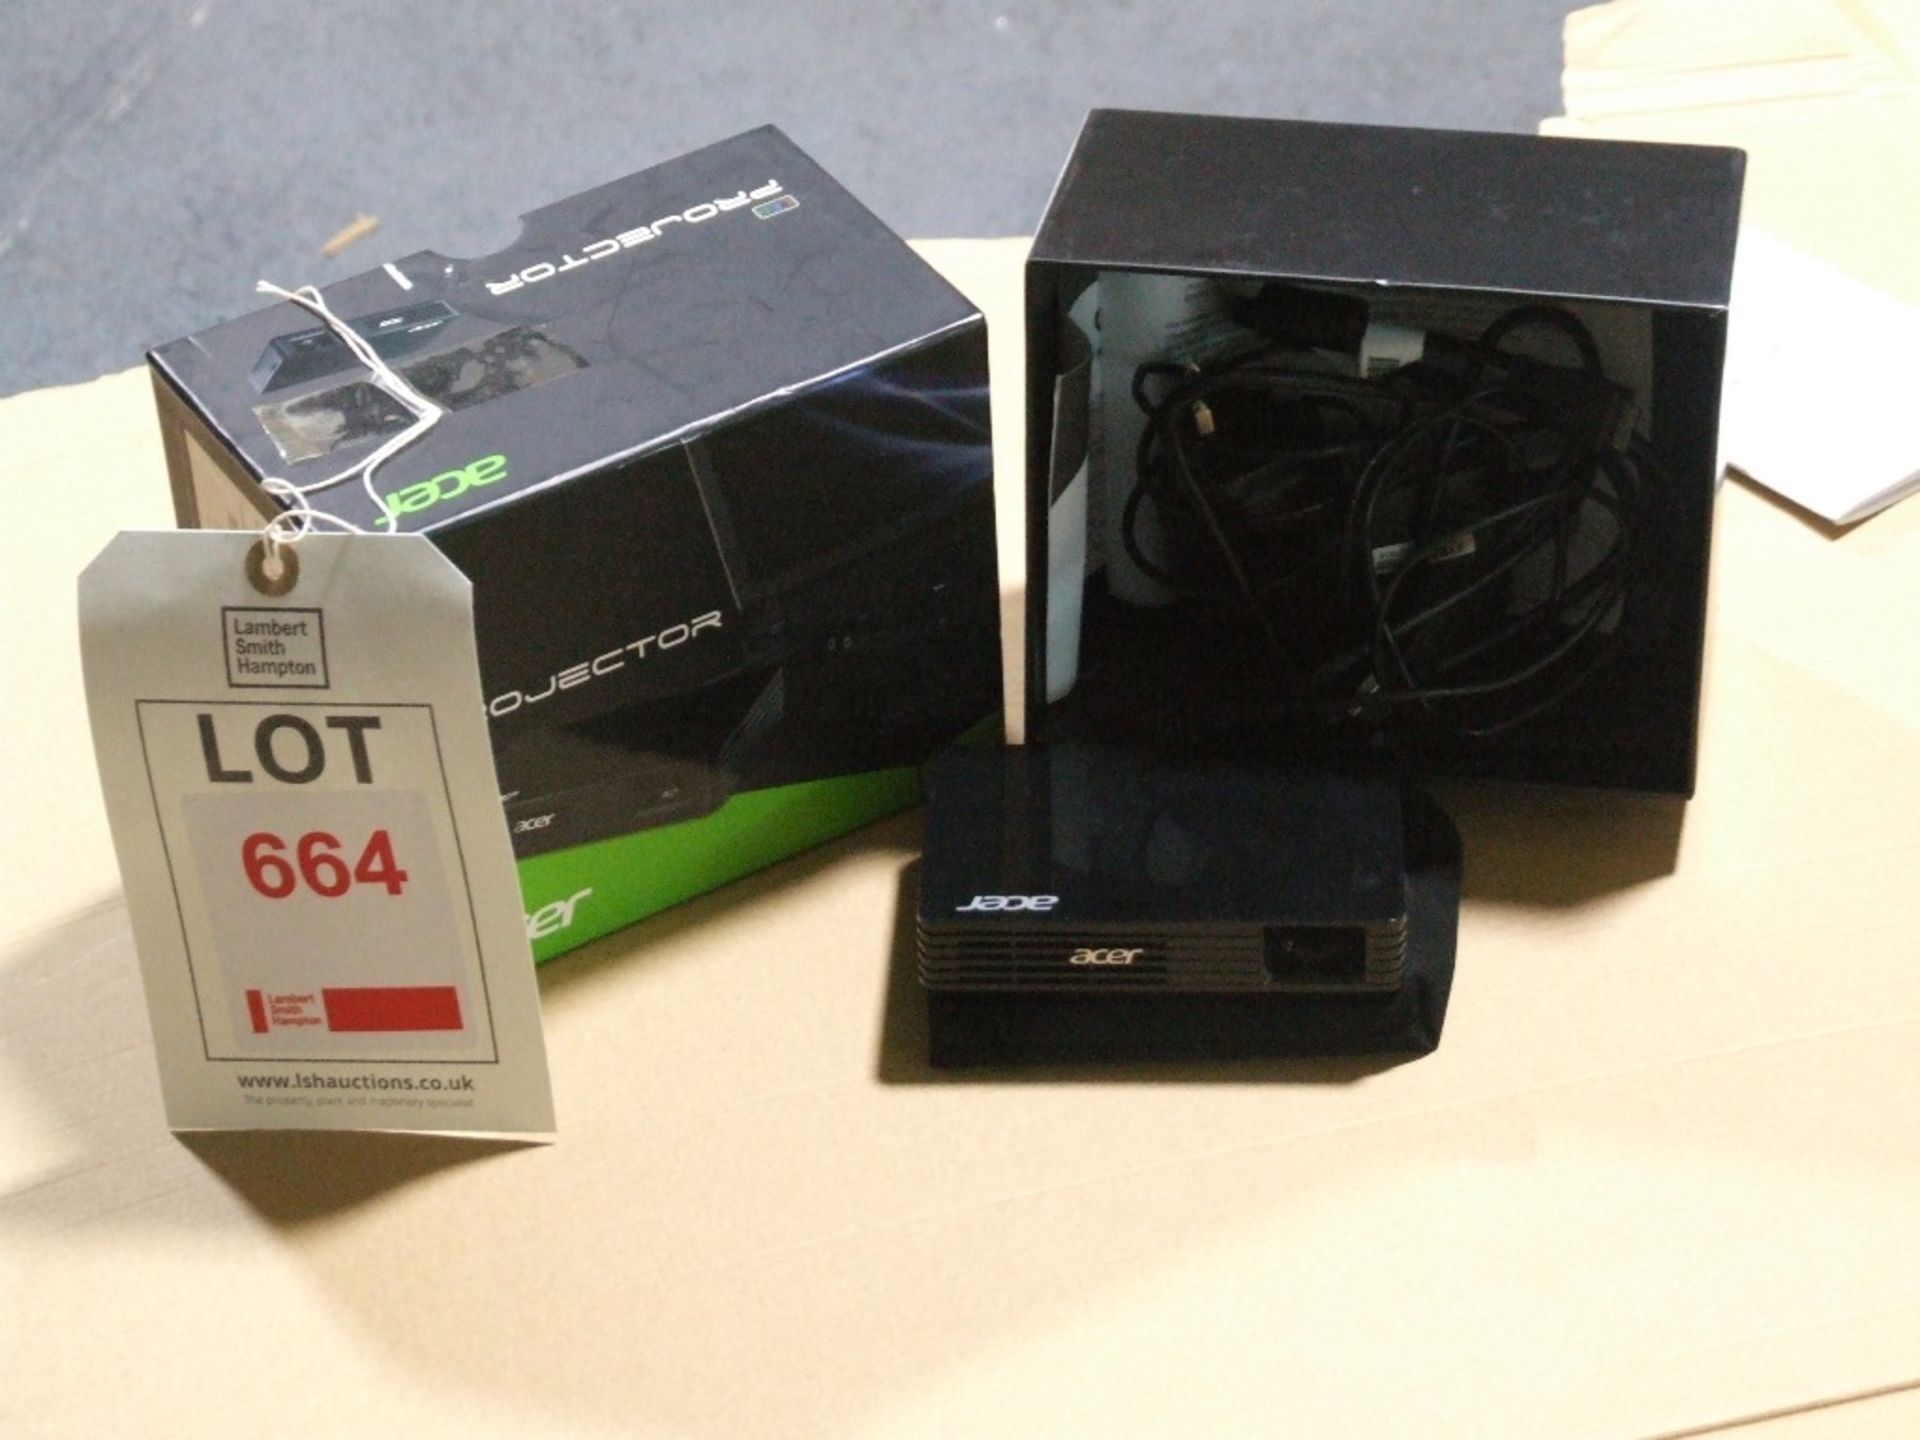 Acer C120 LED pocket projector, boxed, with AC adaptor and case